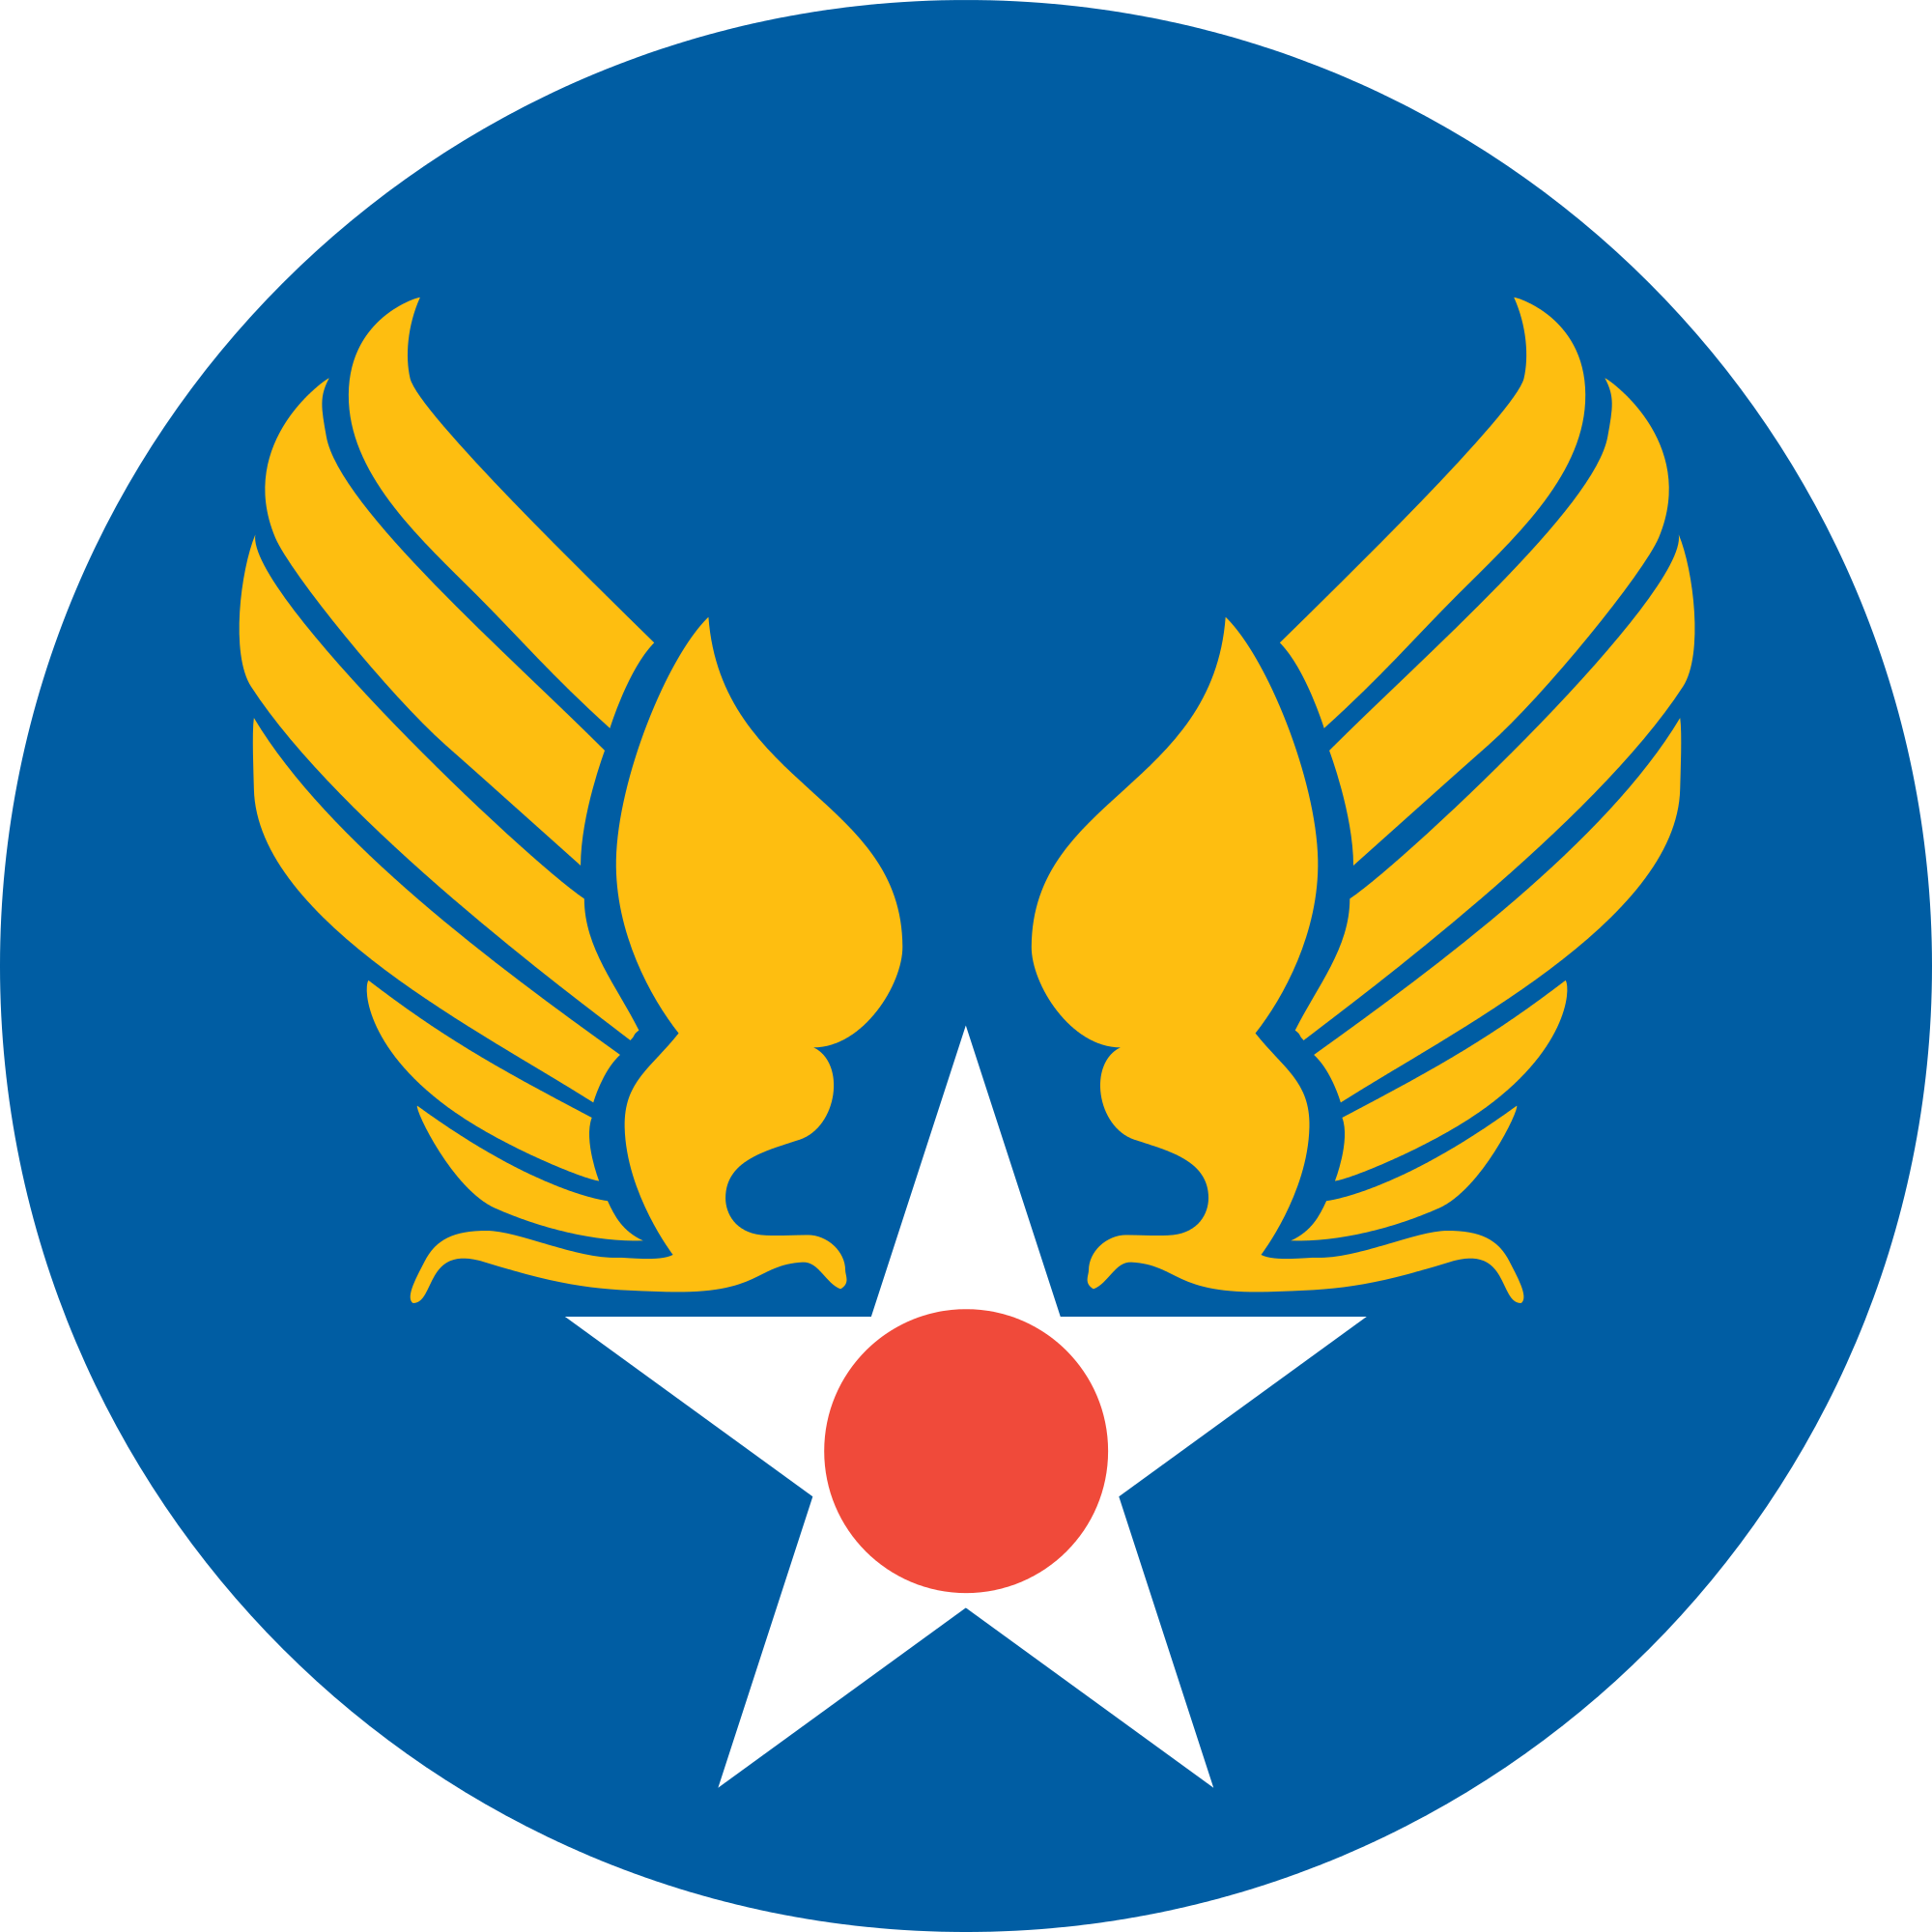 United States Army Air Forces - Wikipedia, the free encyclopedia